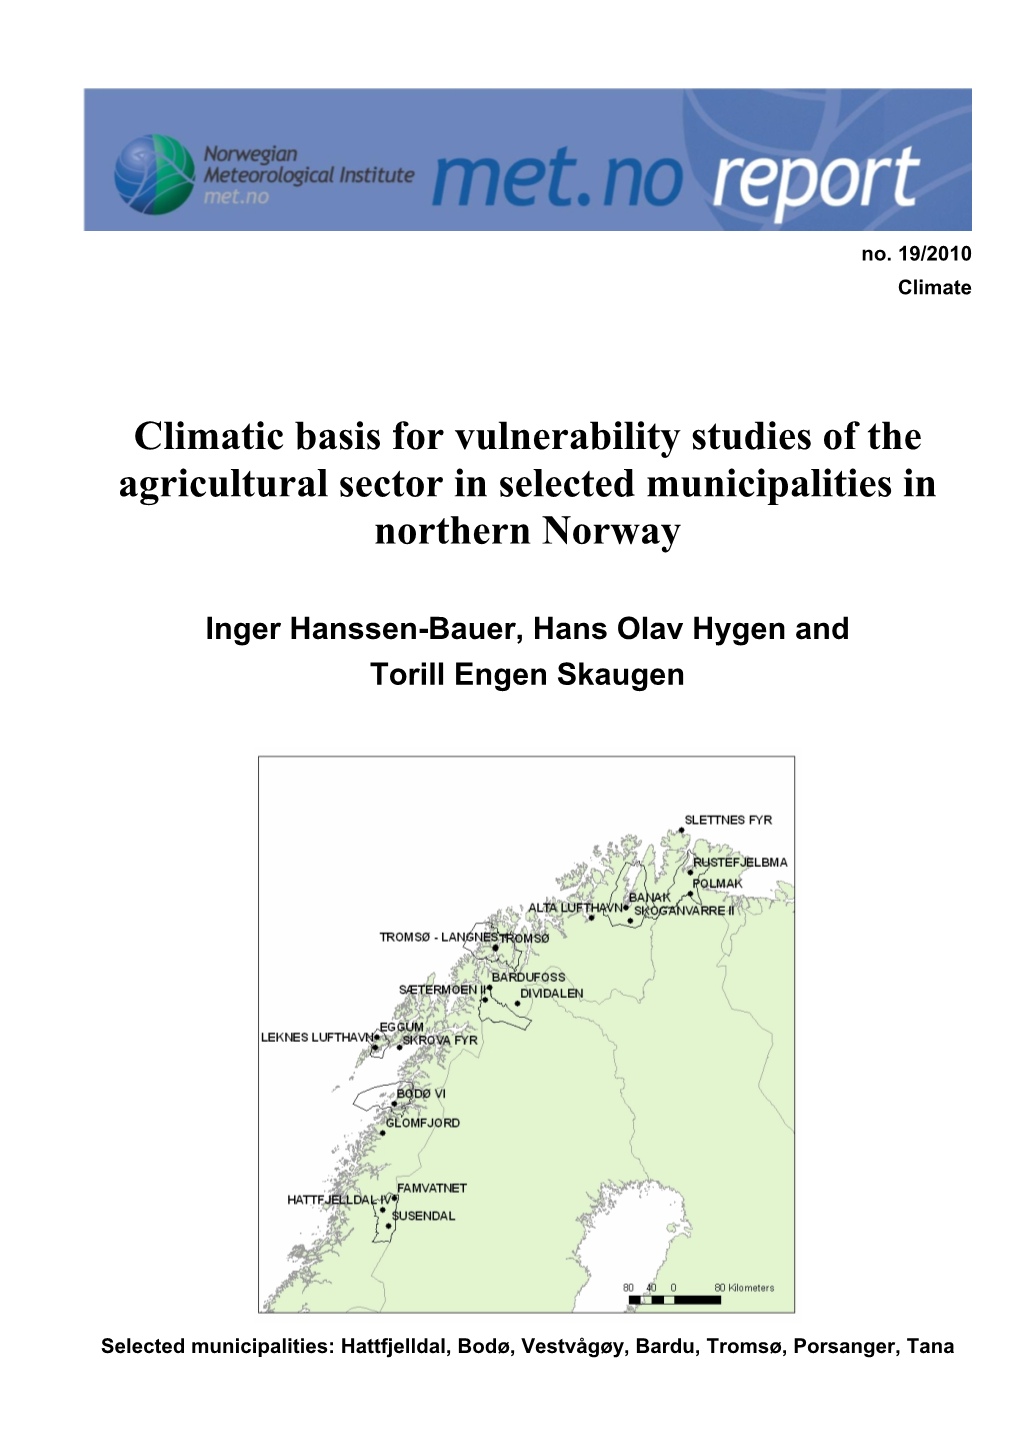 Climatic Basis for Vulnerability Studies of the Agricultural Sector in Selected Municipalities in Northern Norway